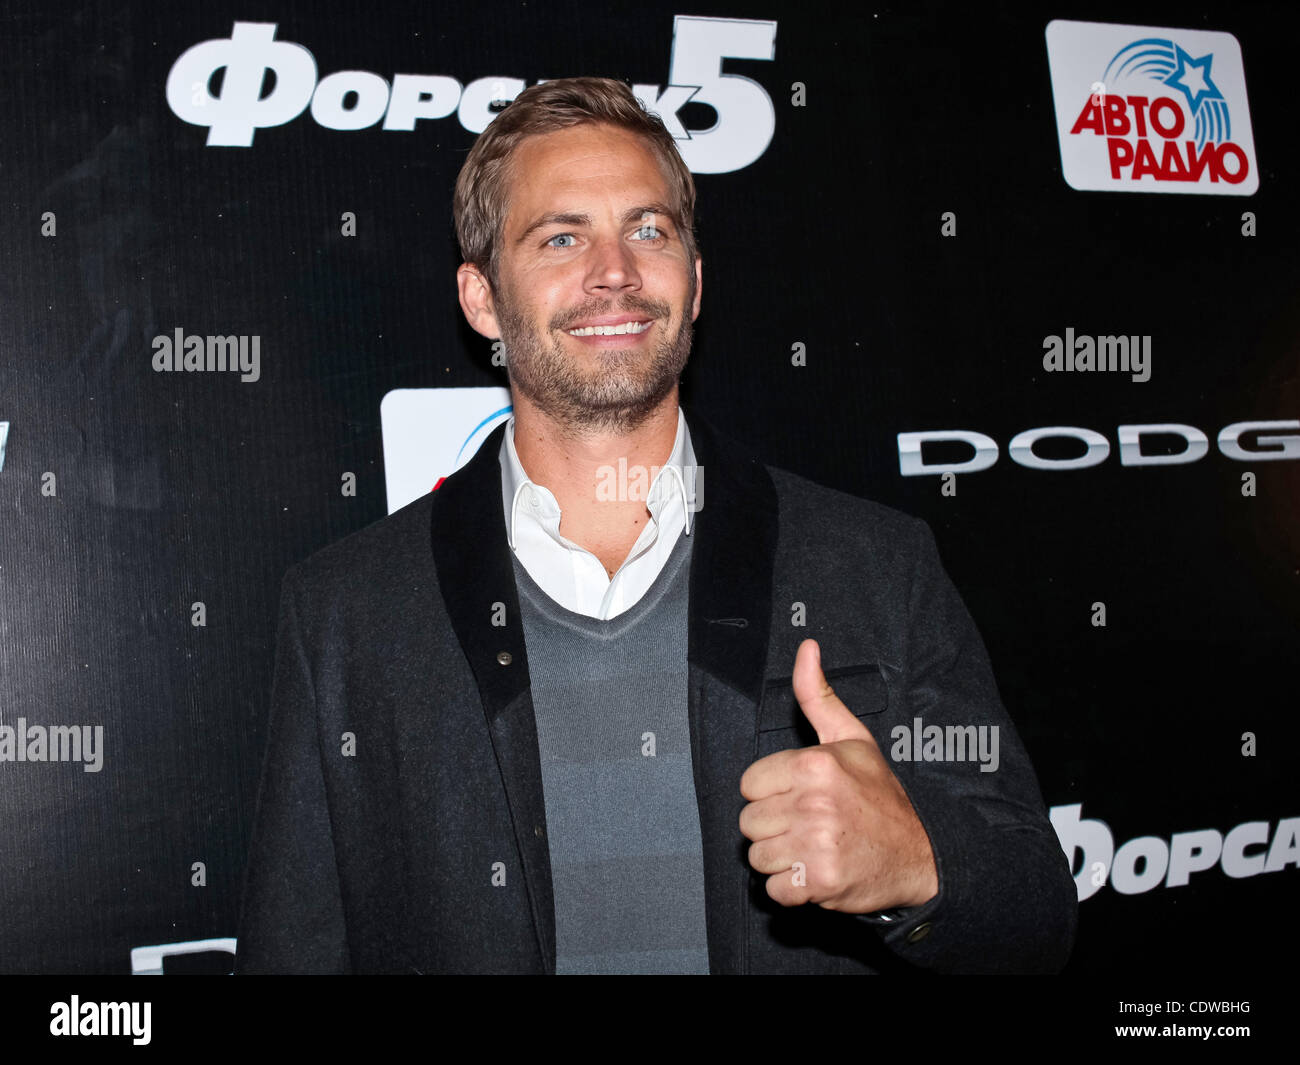 Apr 24, 2011 - Moscow, Russia - Actor PAUL WALKER attends the premier of Russian Premier of Fast & Furious 5 (Fast Five) in Oktyabr cinema theatre of Moscow. (Credit Image: &#169; PhotoXpress/ZUMAPRESS.com) Stock Photo